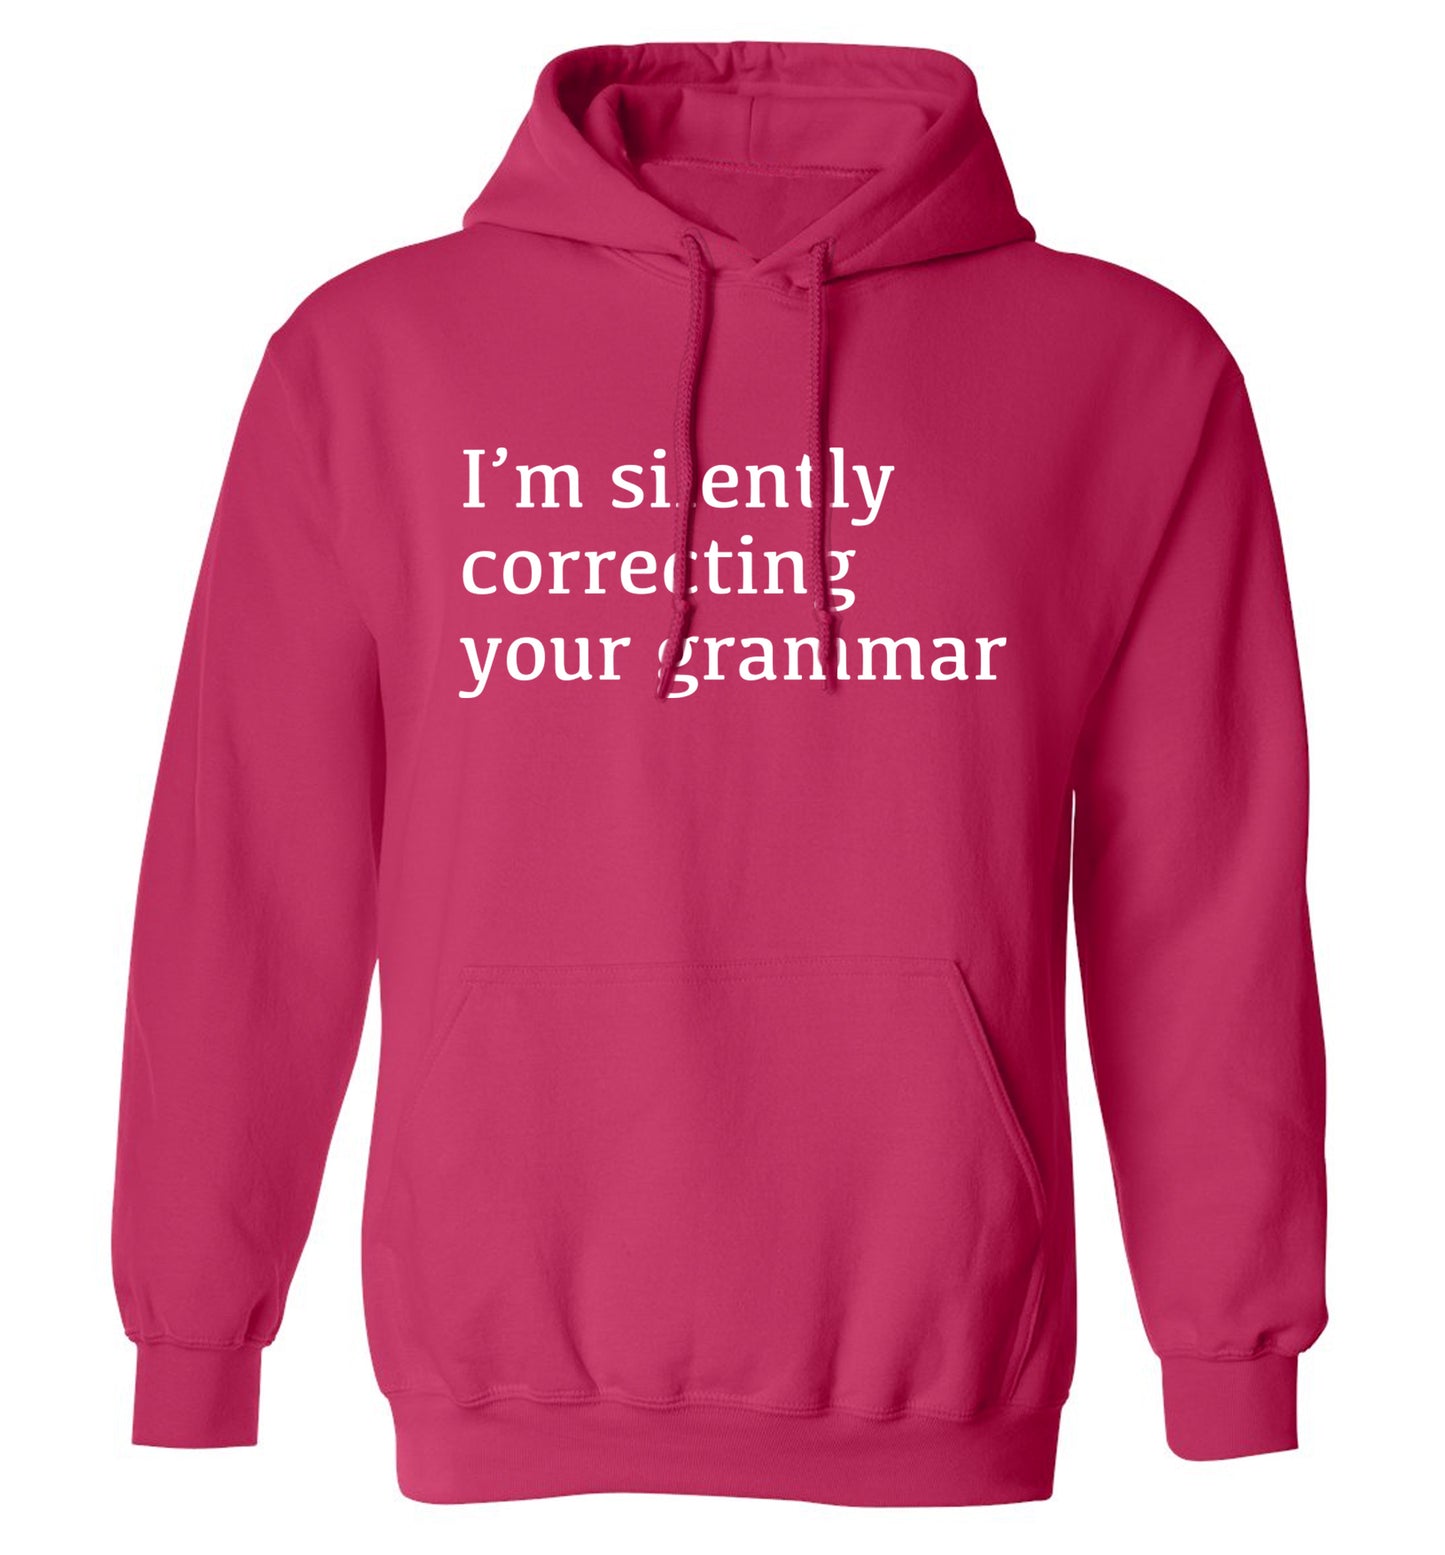 I'm silently correcting your grammar  adults unisex pink hoodie 2XL